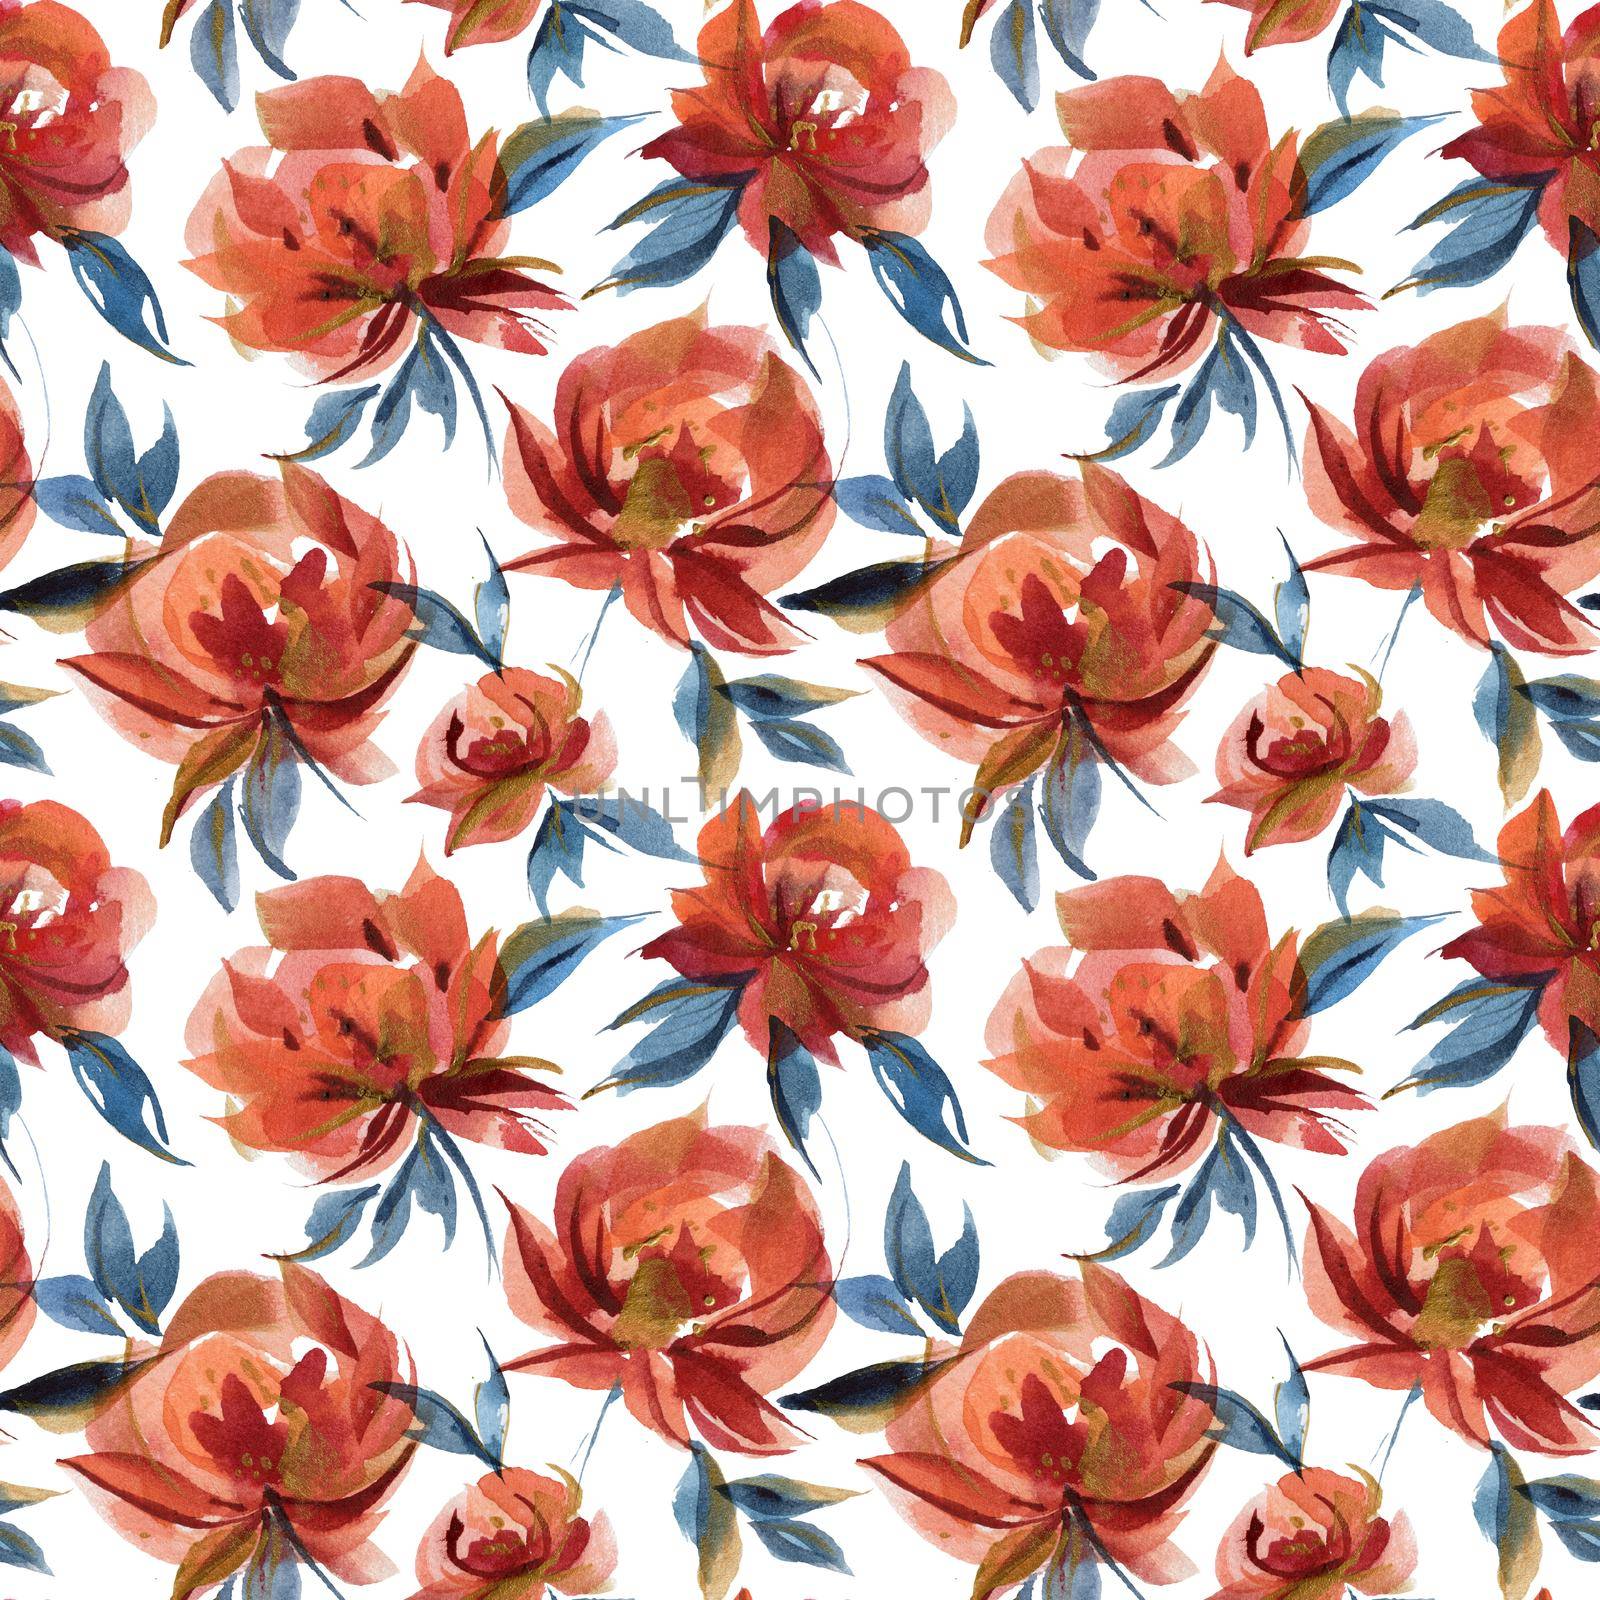 Cottage ditsy seamless pattern with blue and orange folk roses by Xeniasnowstorm